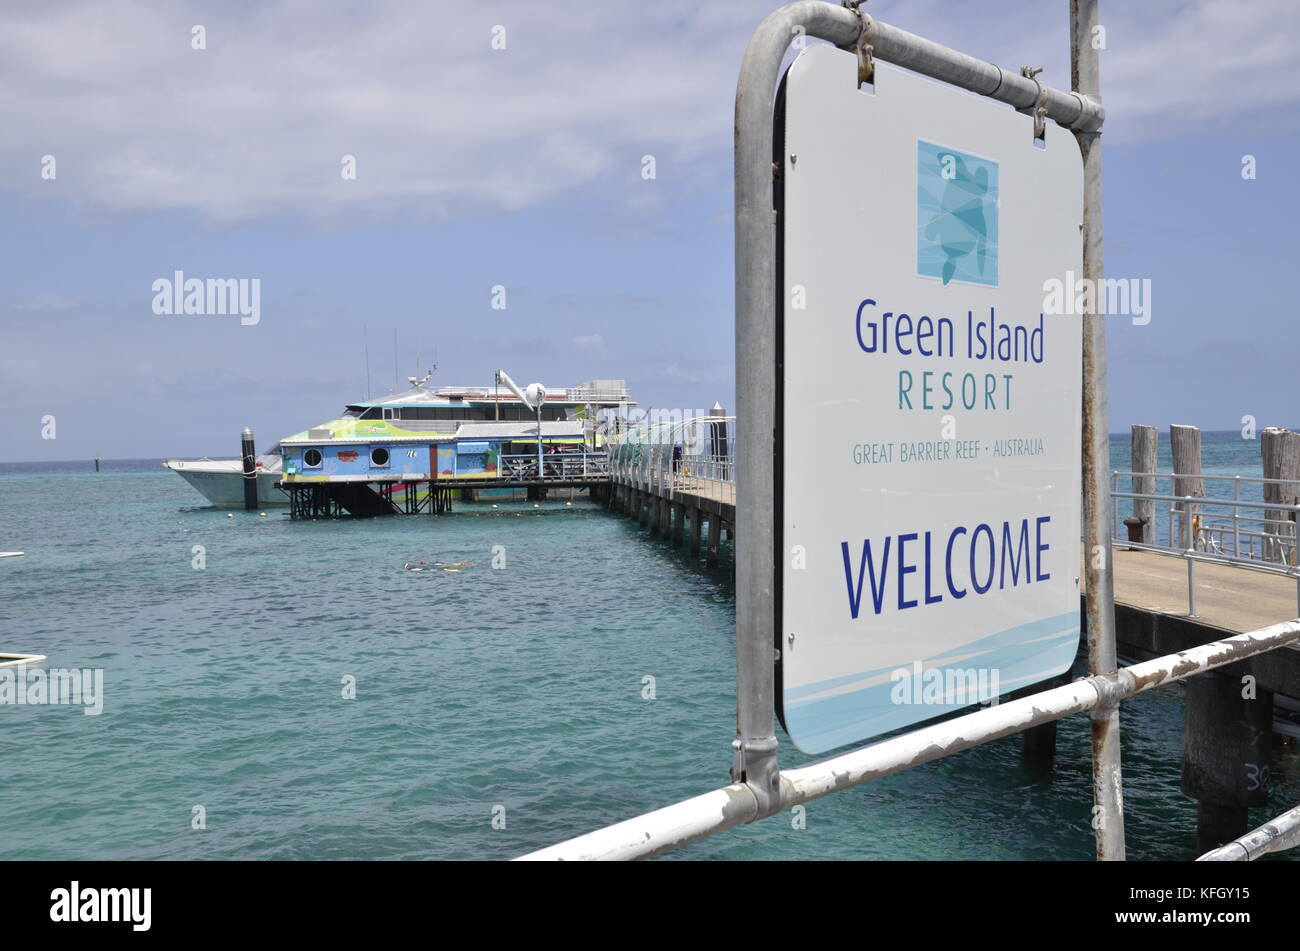 A Cairns ferry discharges tourists at the wharf at the resort of Green Island on the Great barrier reef in northern Queensland, Australia Stock Photo